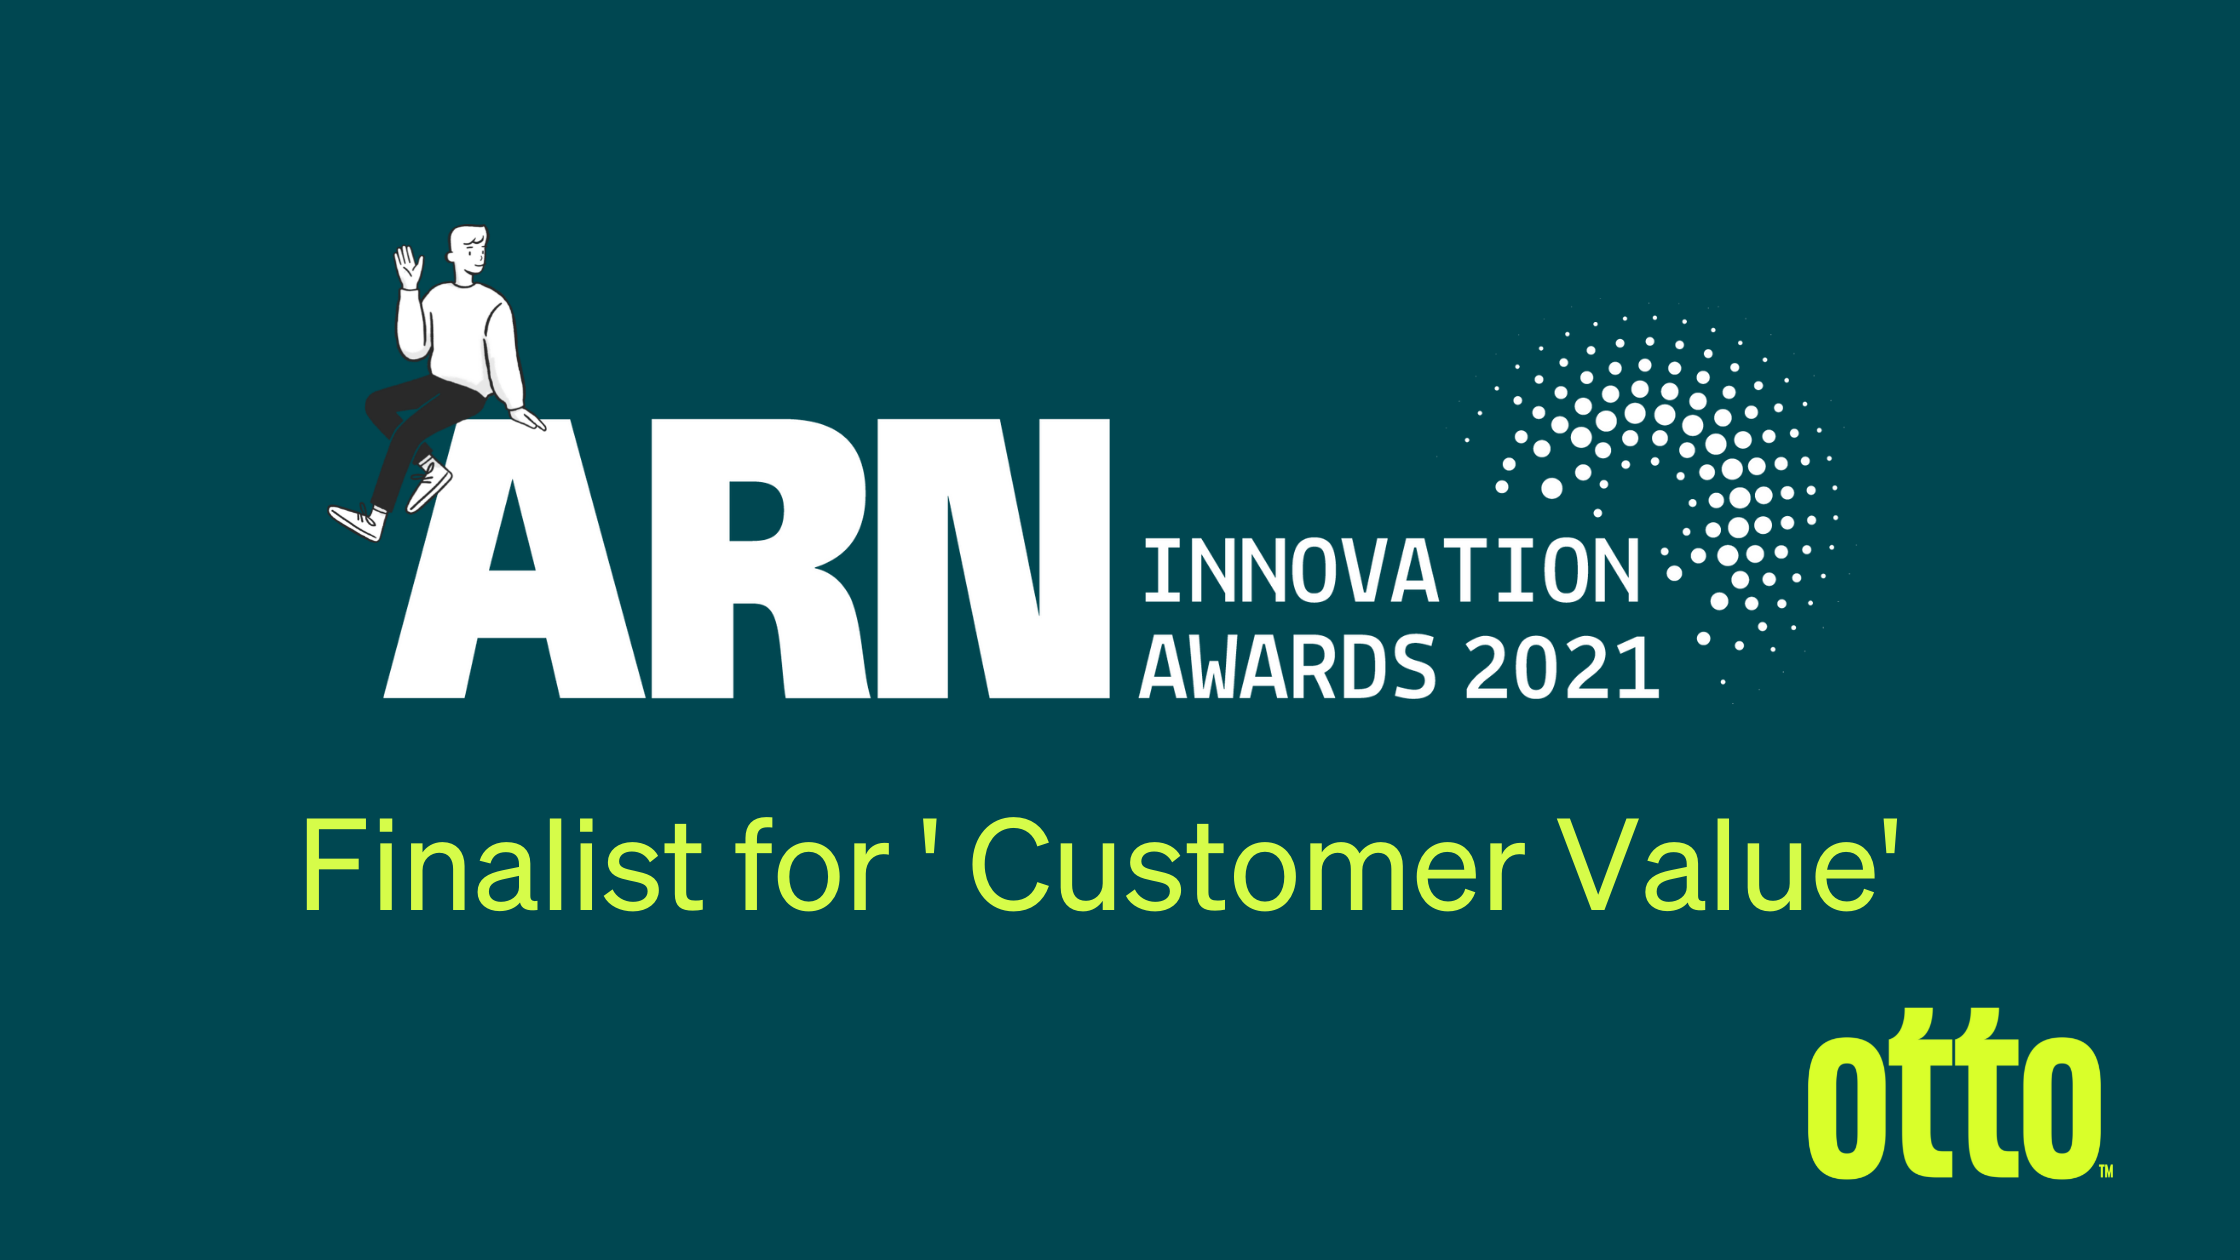 , Otto IT Nominated for 2021 ARN Innovation Award!